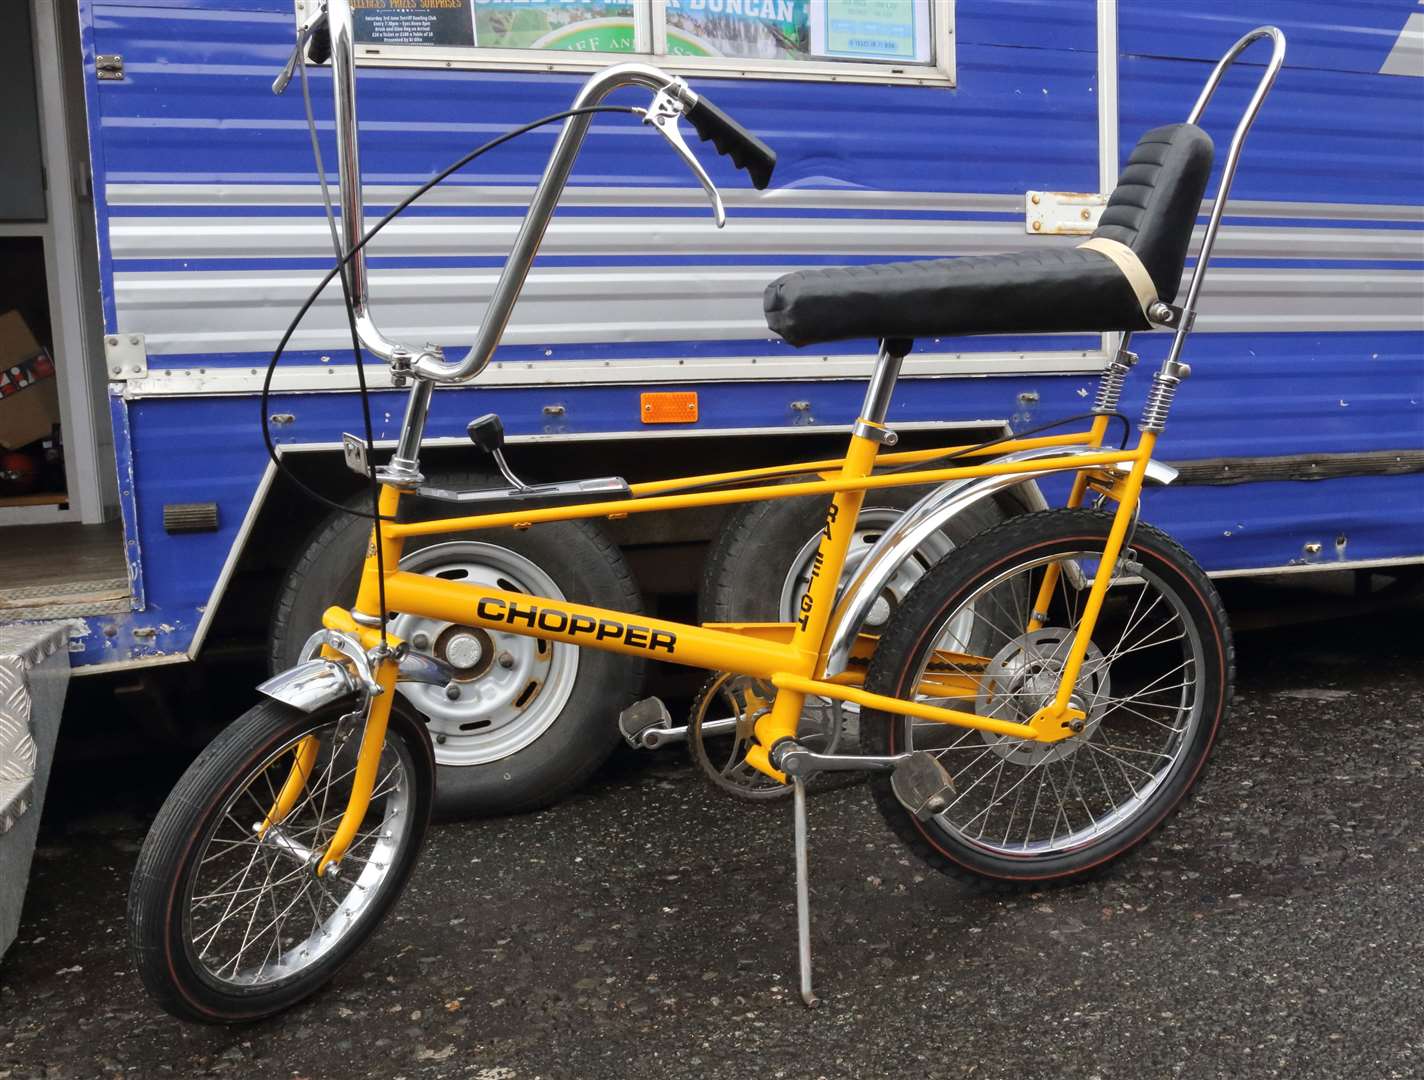 This original 1972 chopper is up for grabs in this years TDVCC raffle